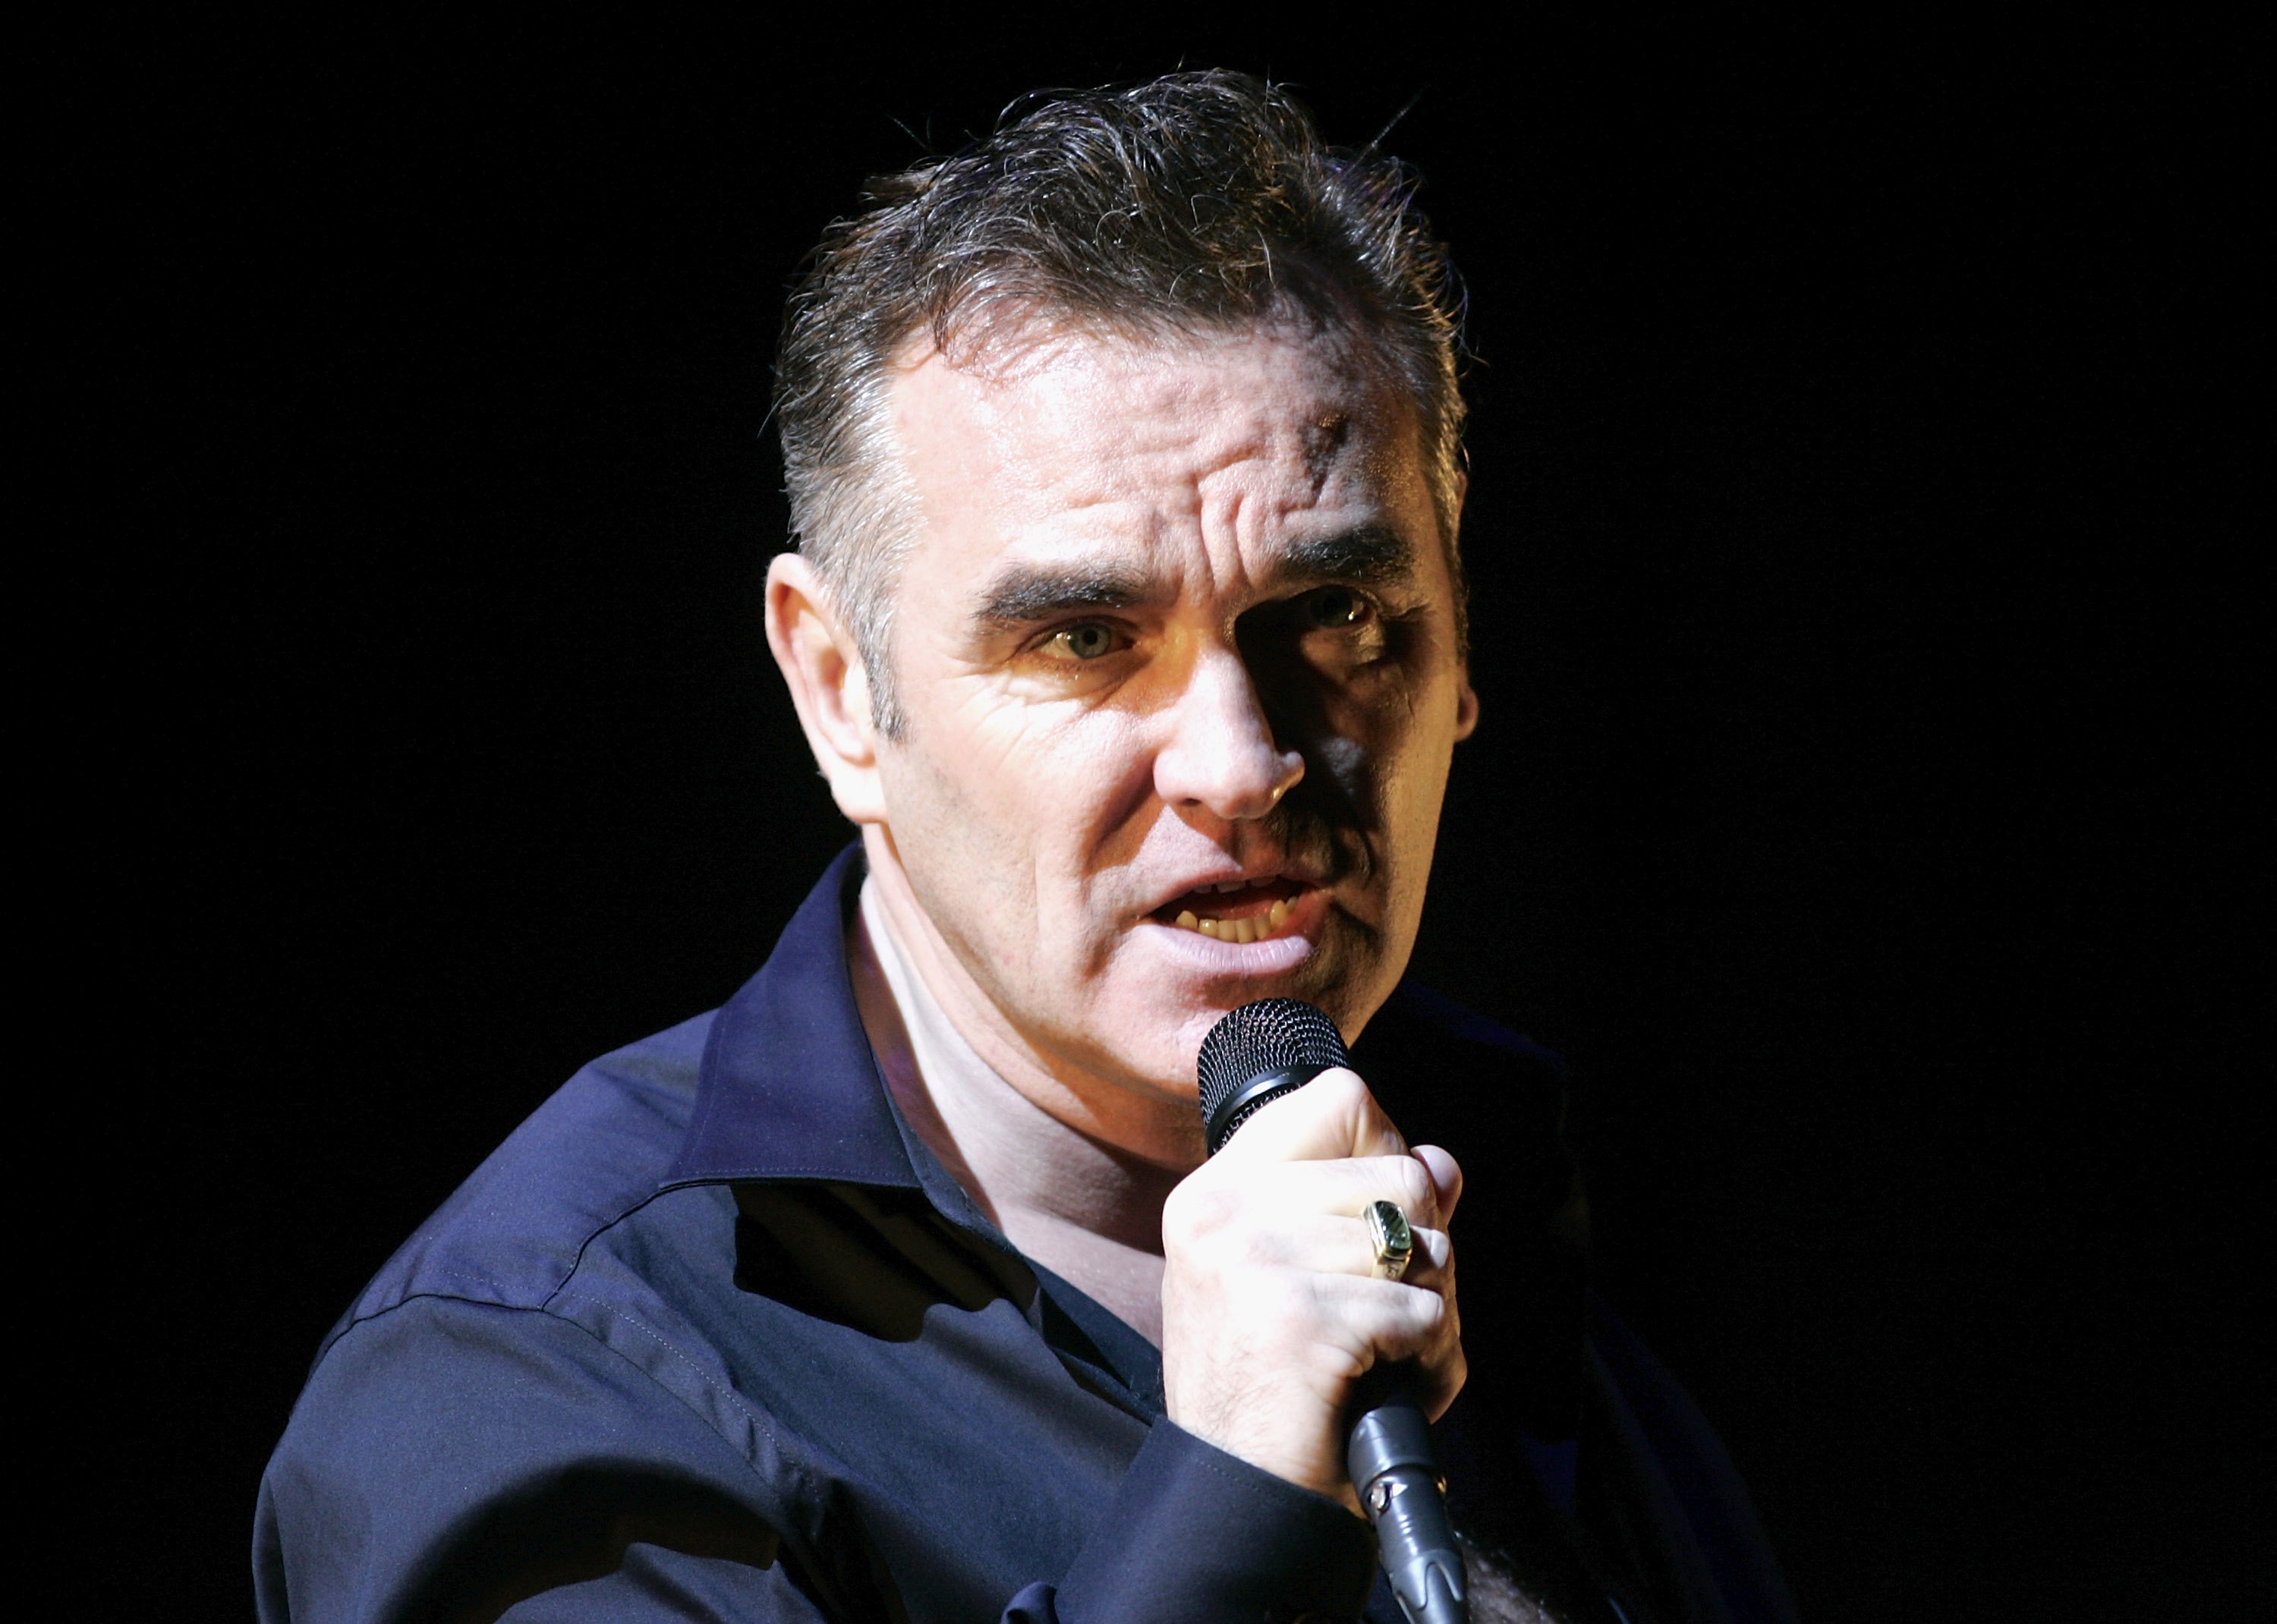 Morrissey cancels US tour due to health, again